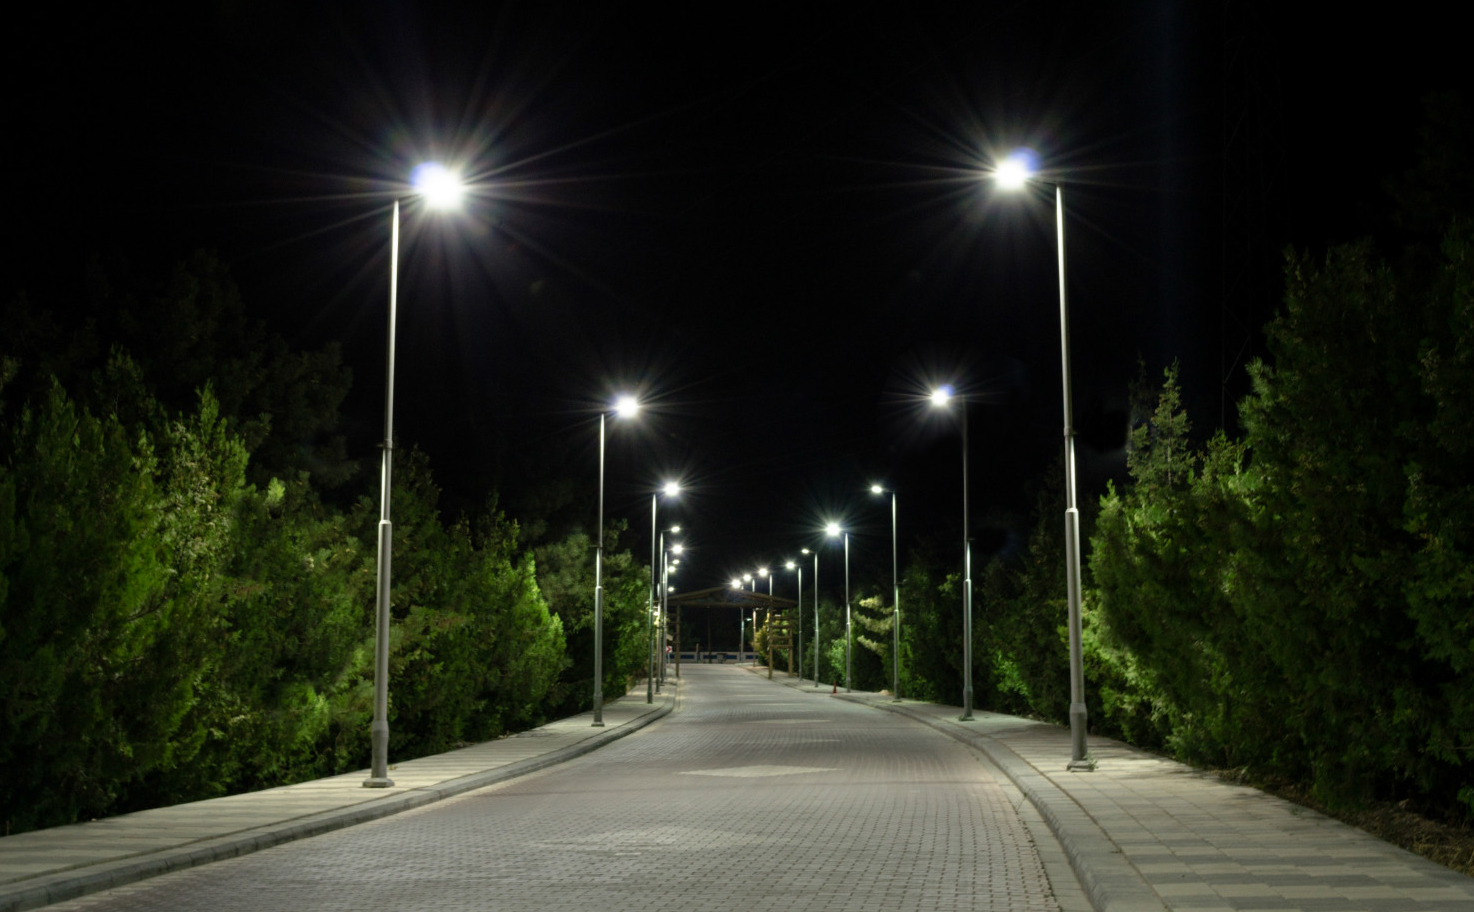 Is it safe to keep led lights on all night? - Blog